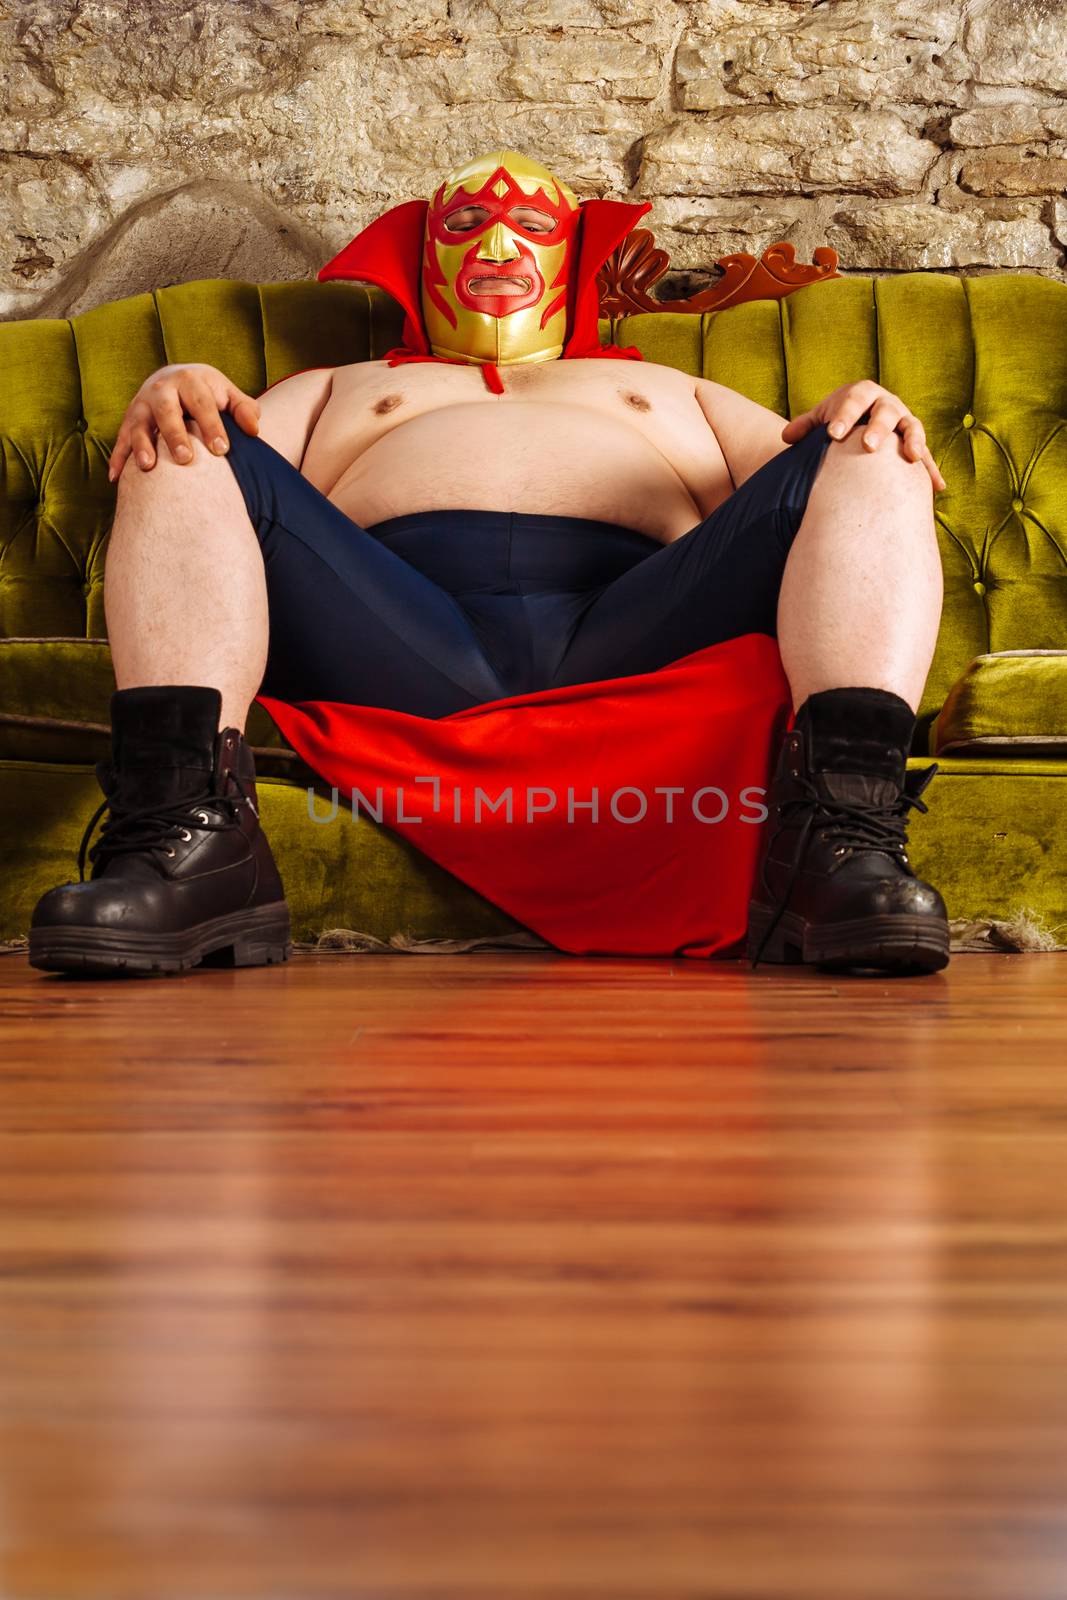 Luchador sitting on a couch by sumners